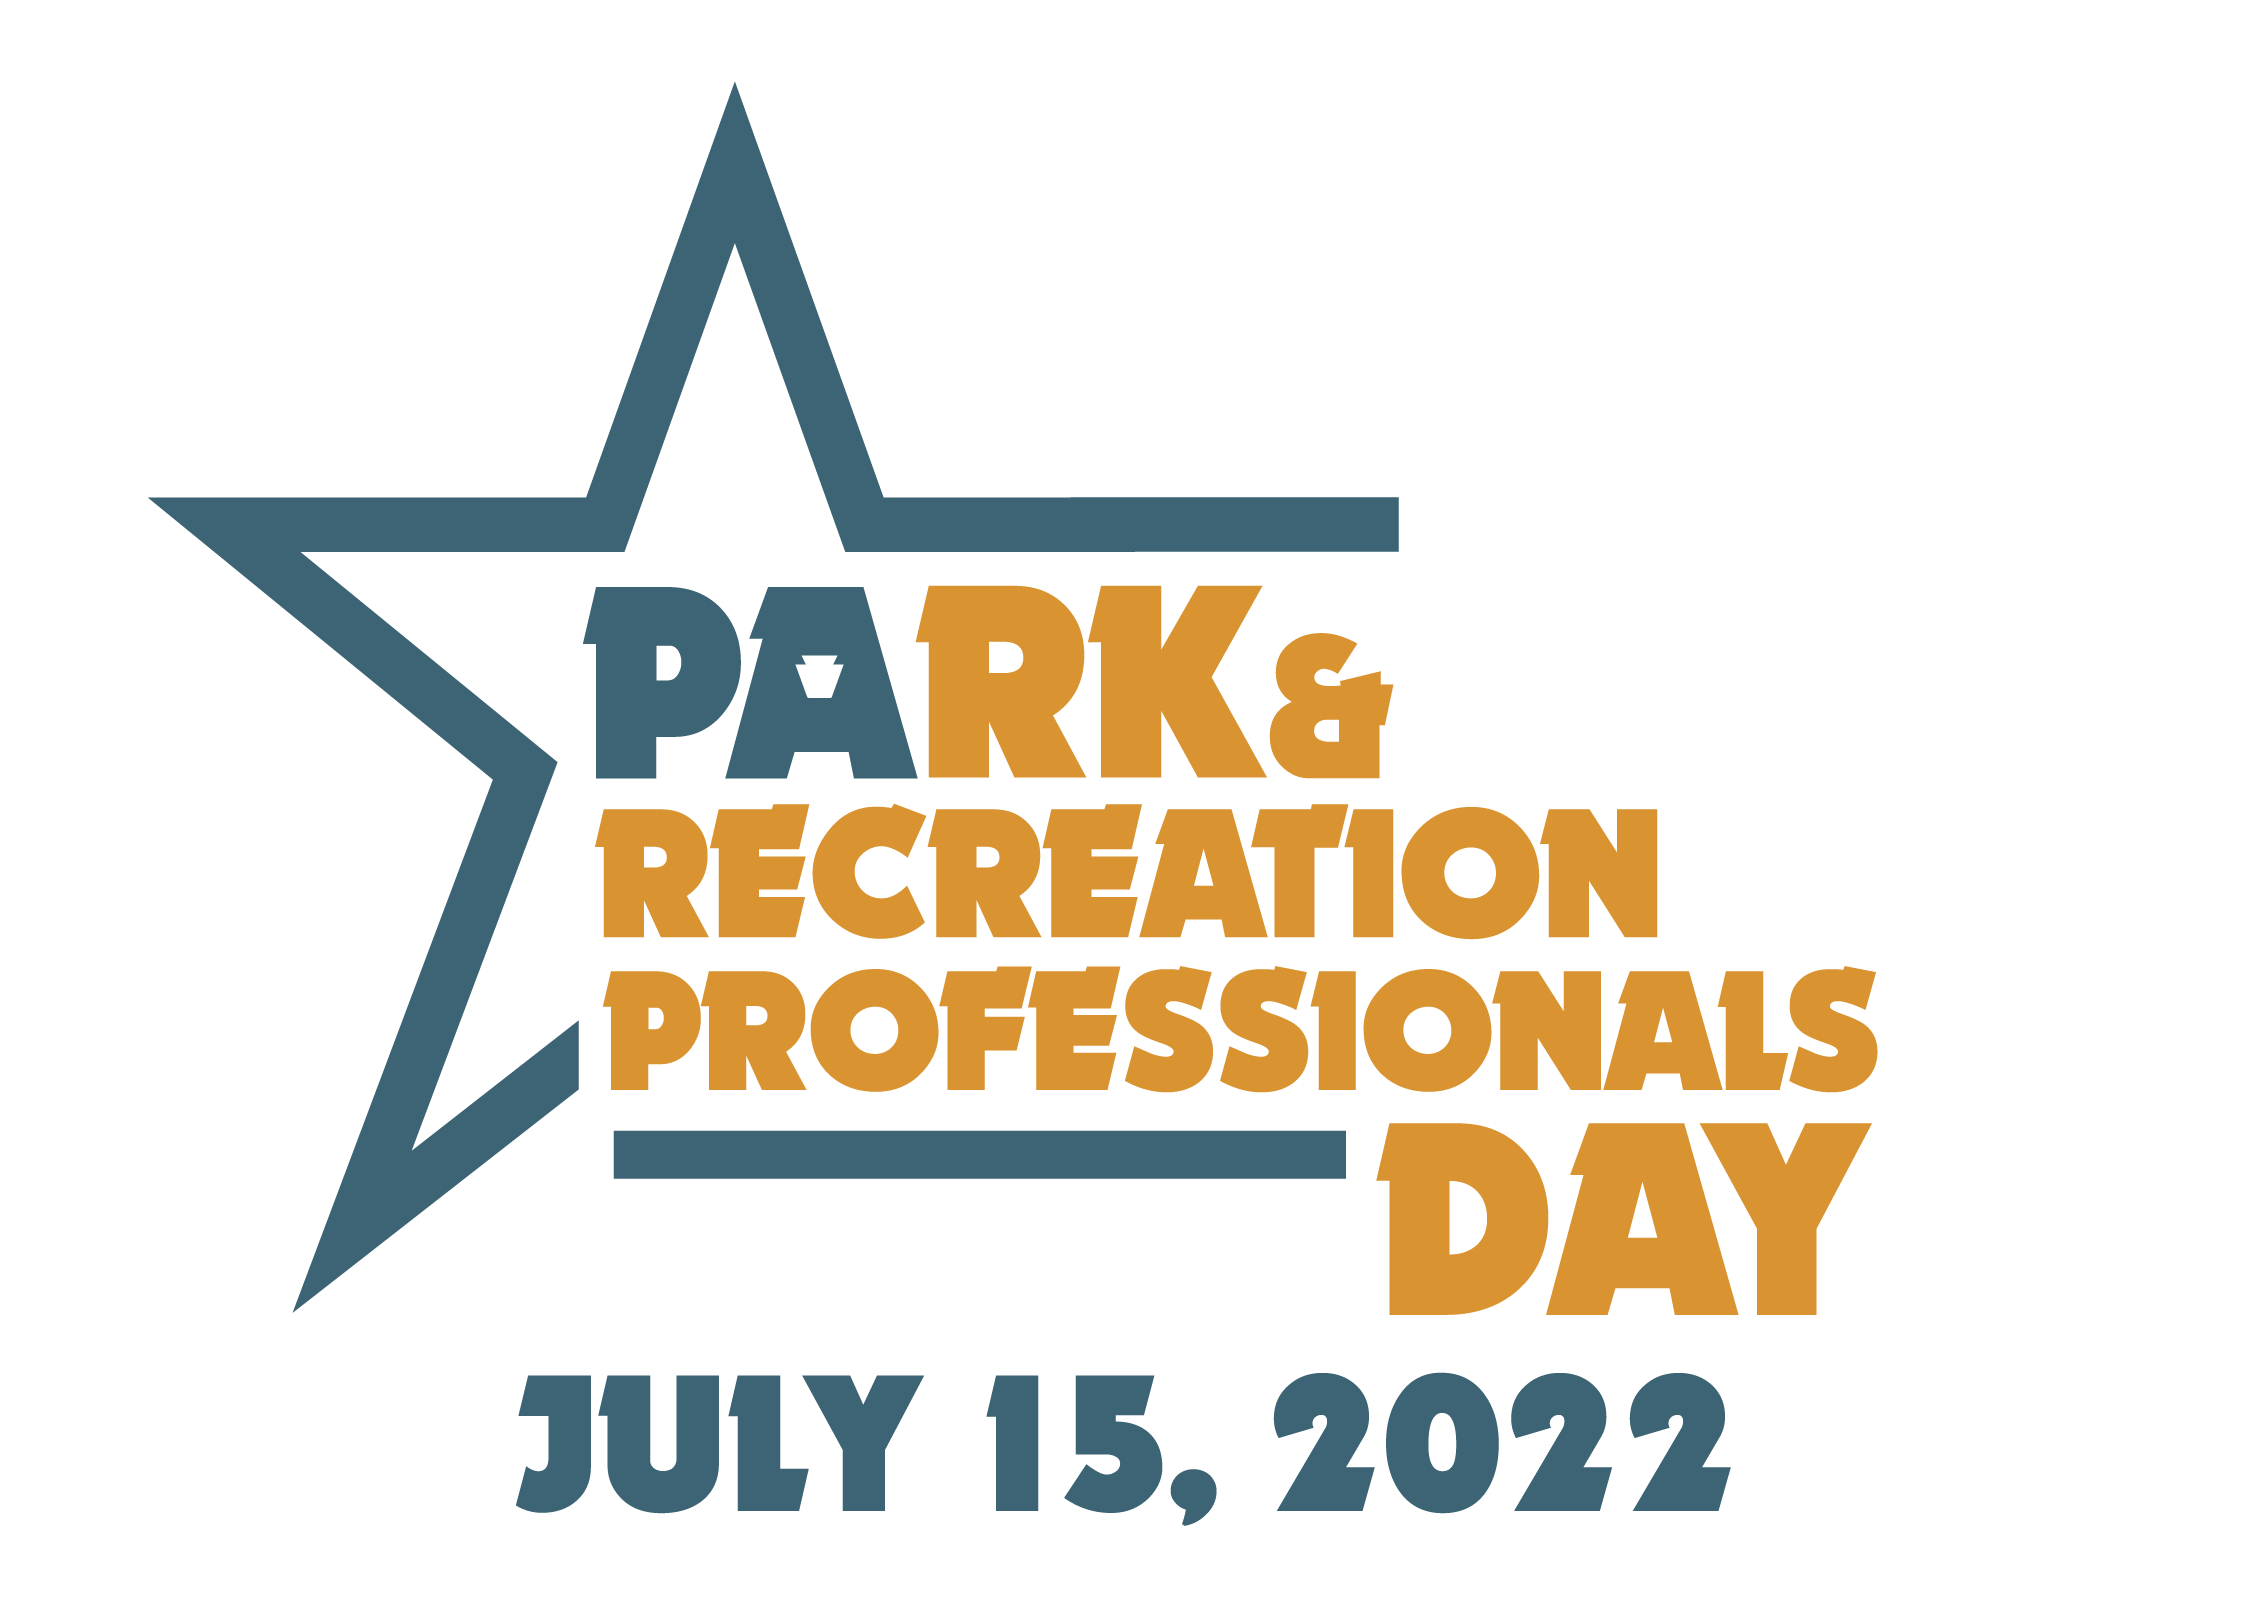 Park and Recreation Professionals Day 2022 Logo